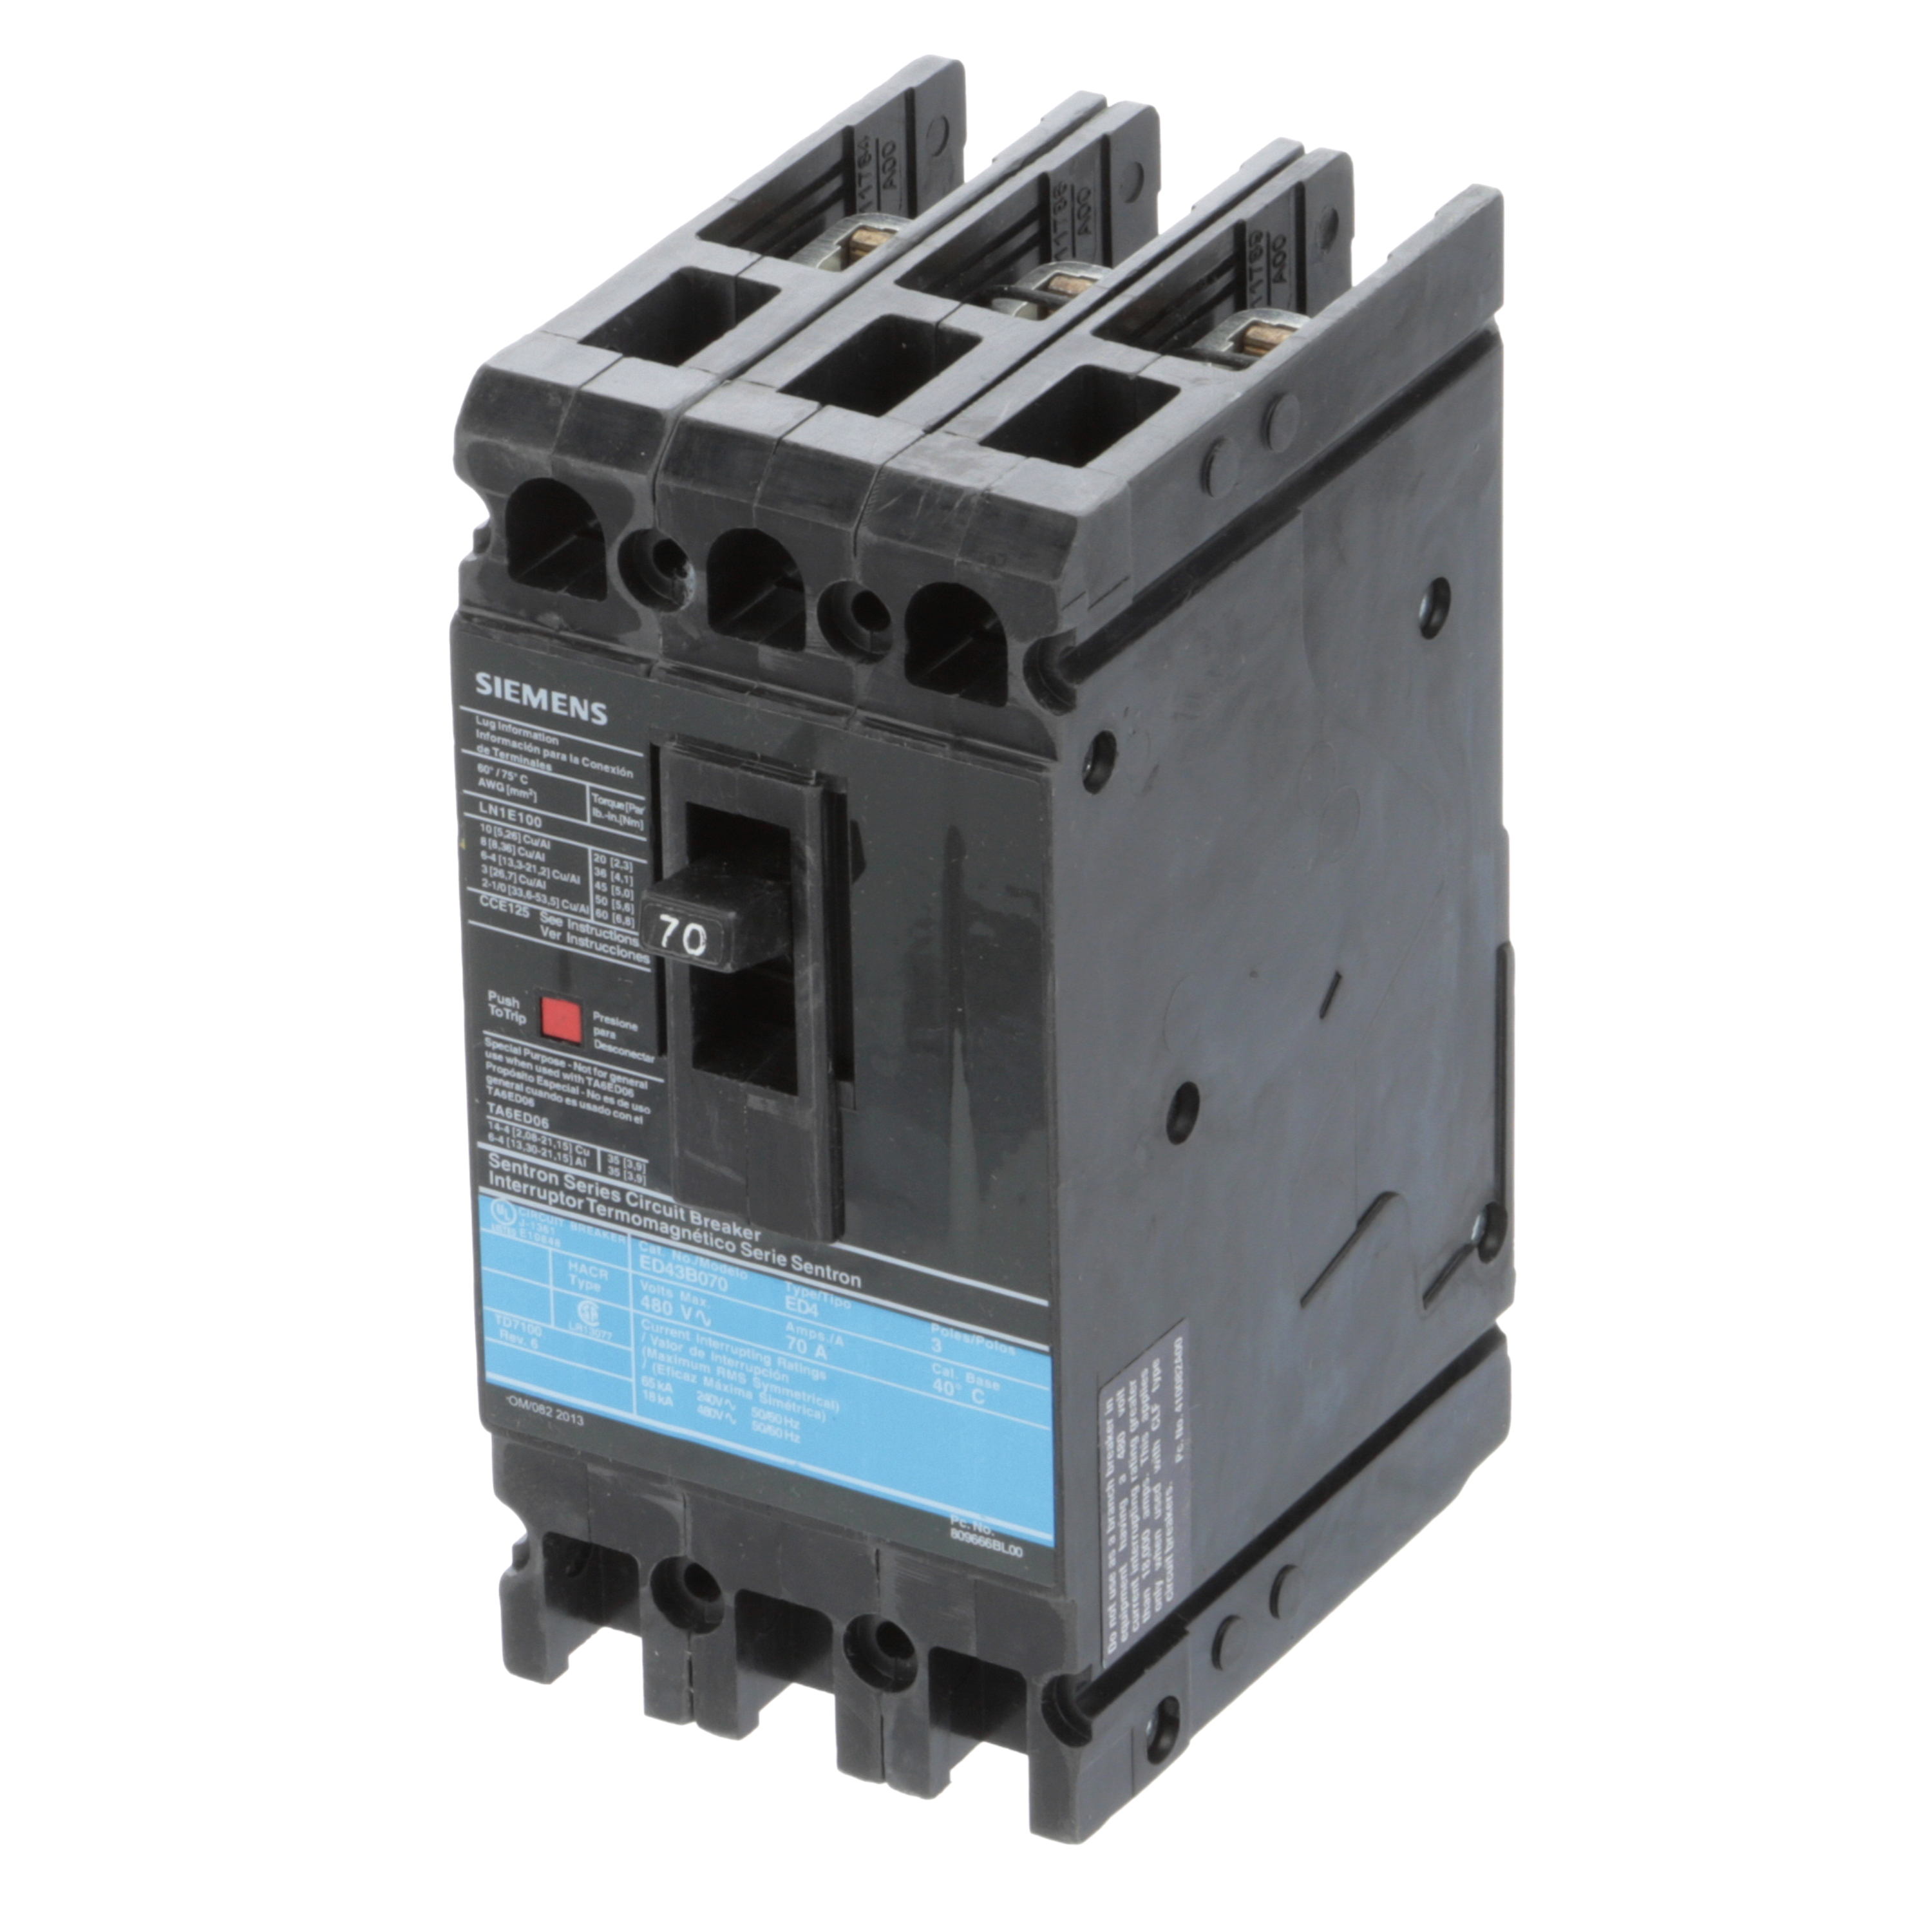 SIEMENS LOW VOLTAGE SENTRON MOLDED CASE CIRCUIT BREAKER WITH THERMAL - MAGNETICTRIP UNIT. STANDARD 40 DEG C BREAKER ED FRAME WITH STANDARD BREAKING CAPACITY. 70A 3-POLE (18KAIC AT 480V). NON-INTERCHANGEABLE TRIP UNIT. SPECIAL FEATURES LINE AND LOAD SIDE LUGS (LN1E100) WIRE RANGE 10 - 1/0AWG (CU/AL). DIMENSIONS (W x Hx D) IN 3.00 x 6.4 x 3.92.